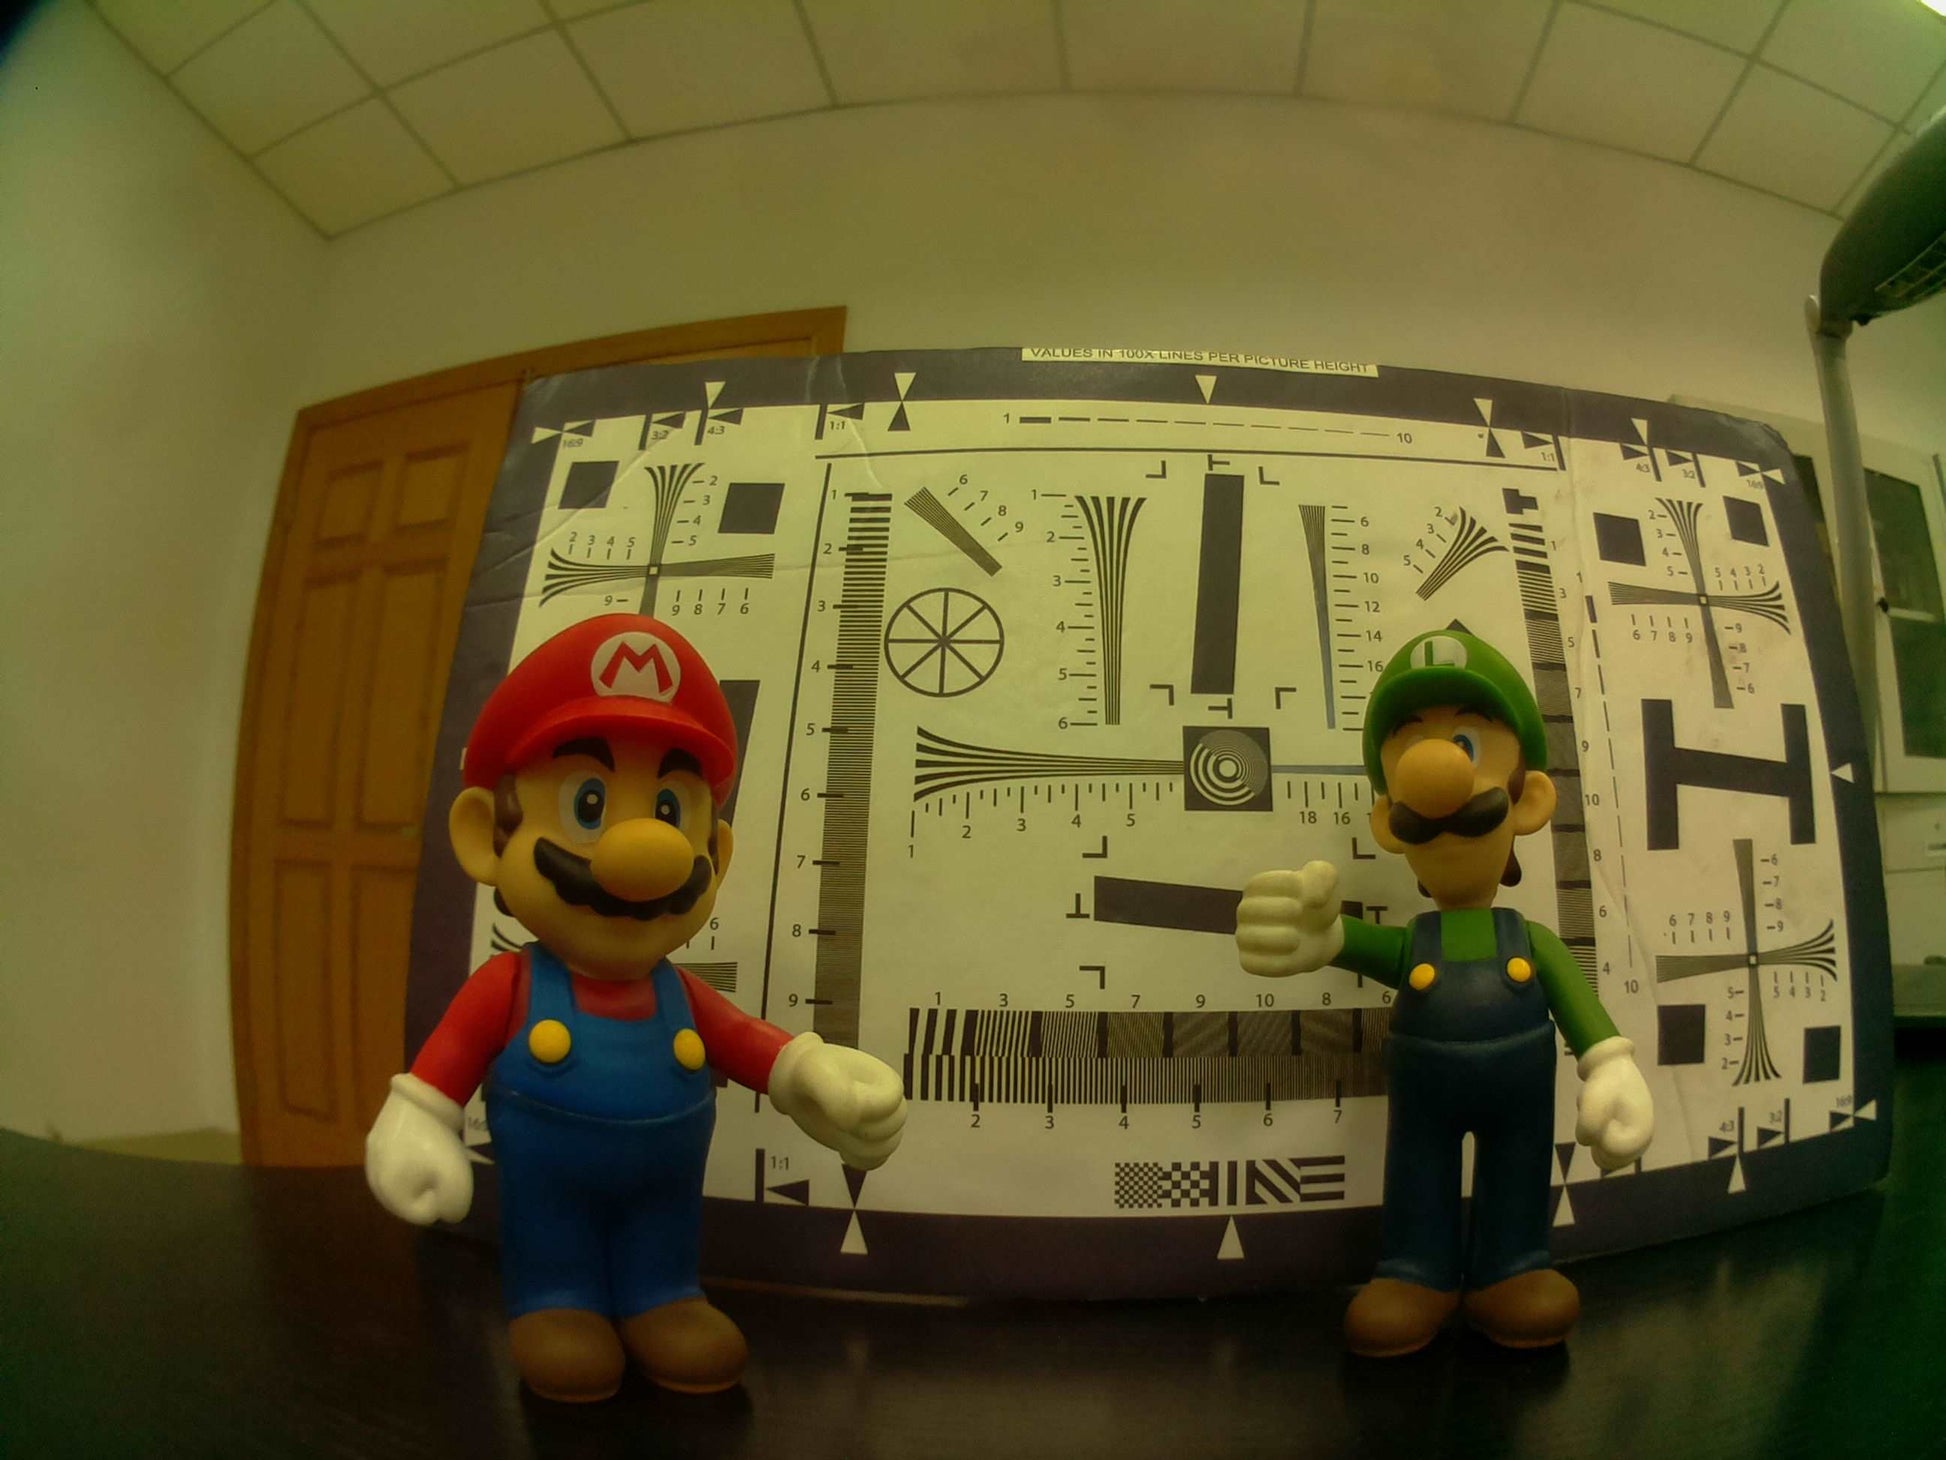 Image of Mario and Luigi captured with the B0154 camera module